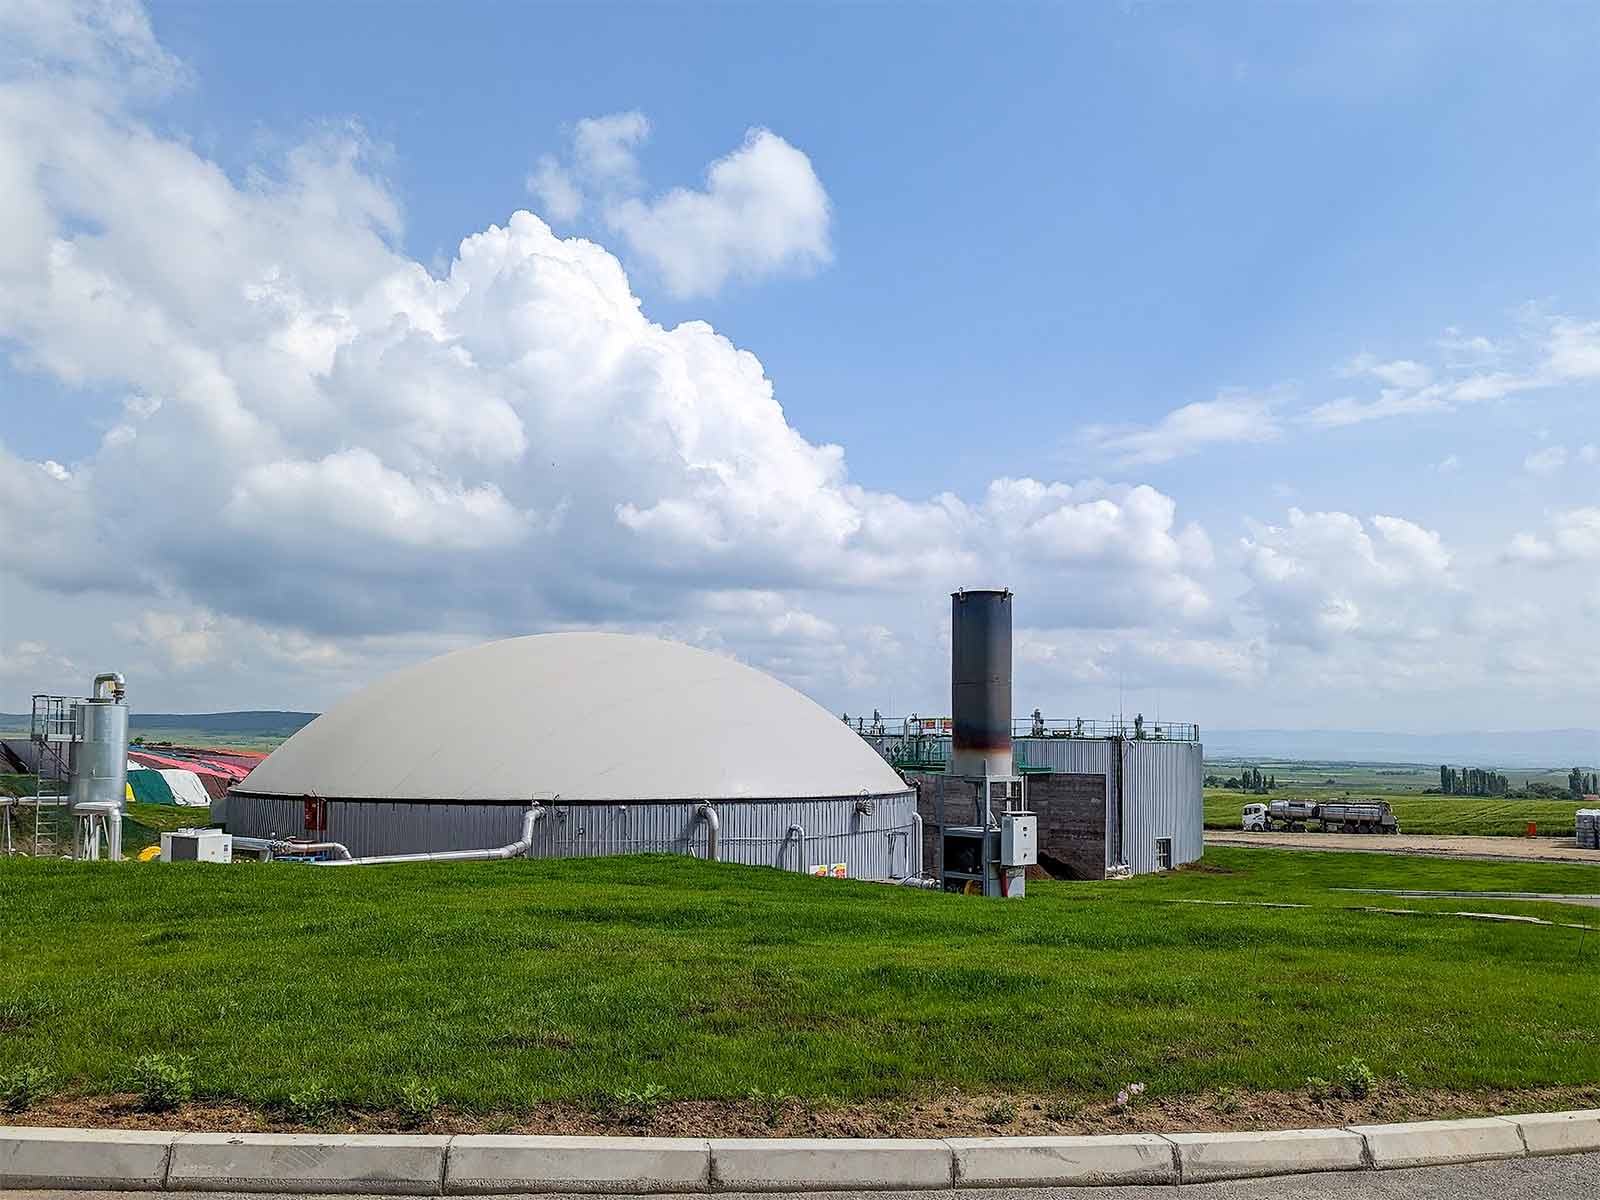 The biogas collected in the digesters is used to generate electricity and thermal energy